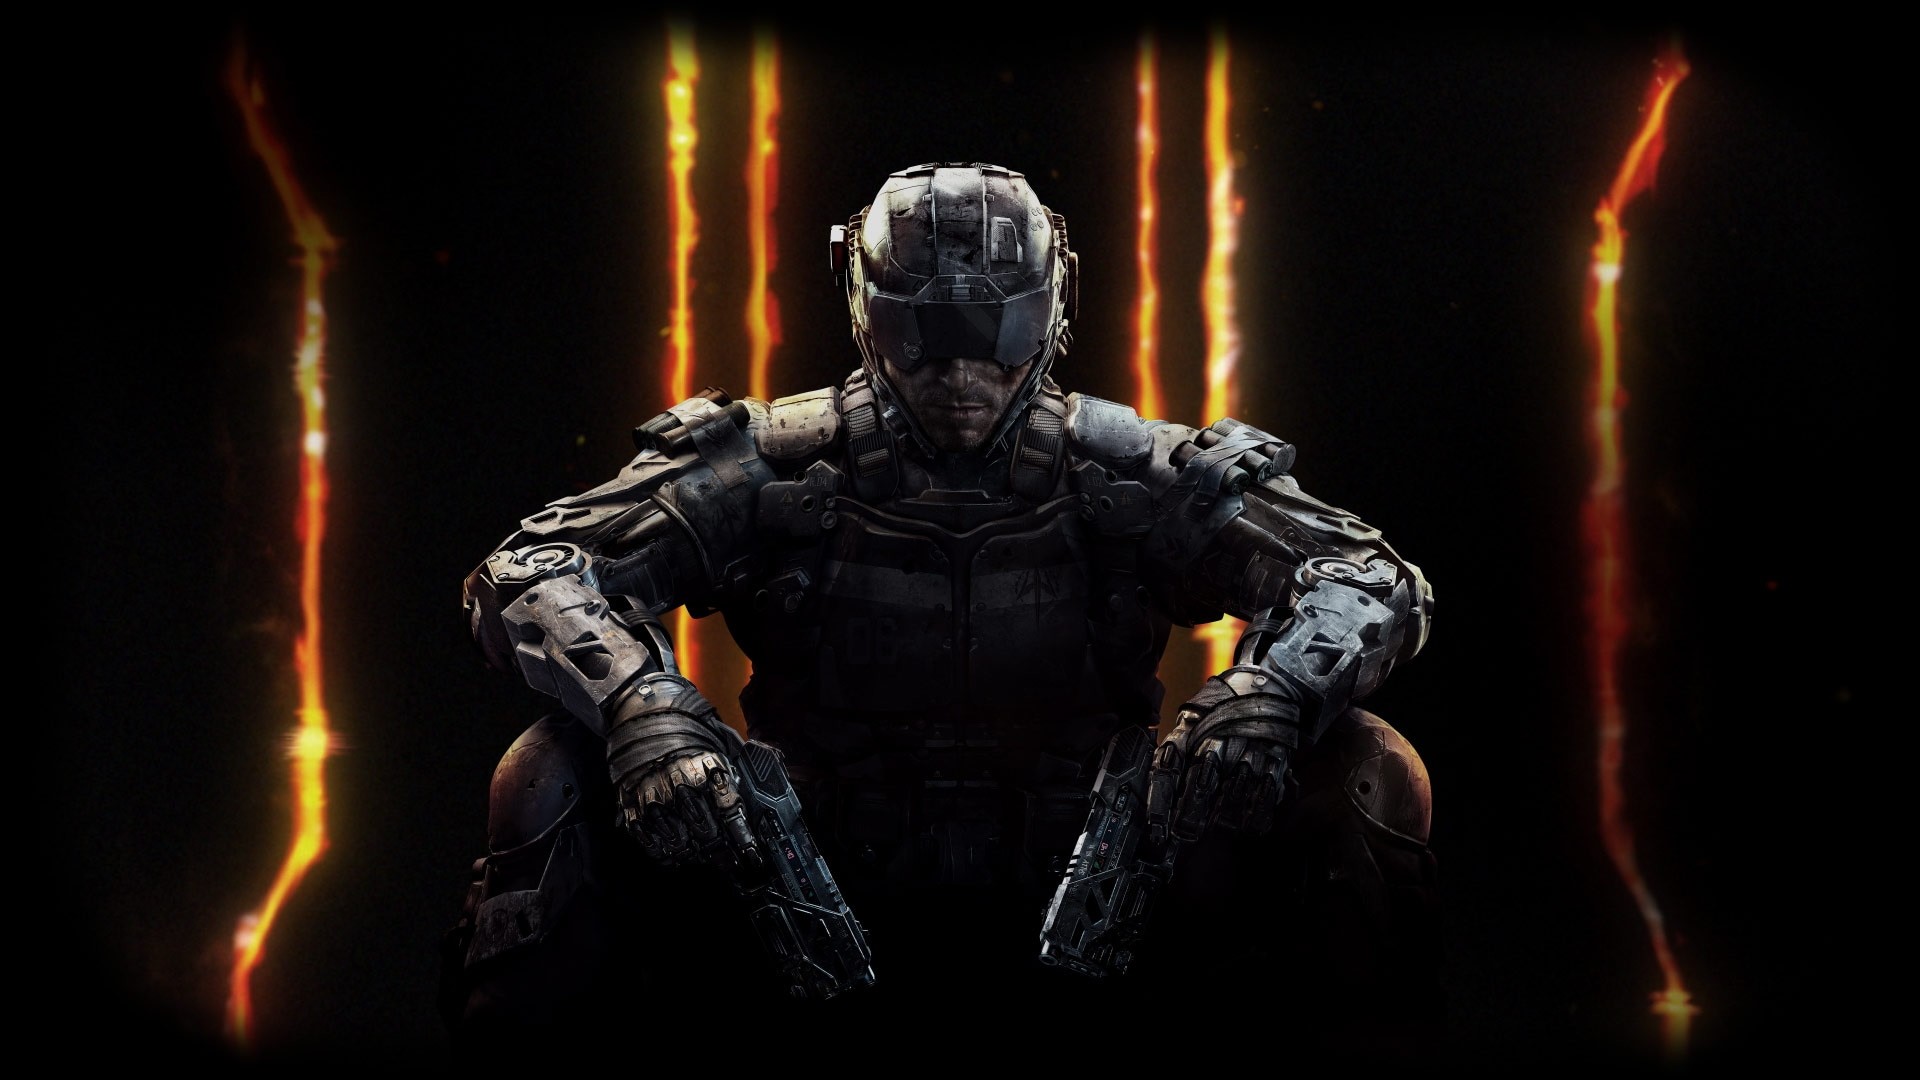 Of Duty: Black Ops III HD Wallpapers | Backgrounds – Wallpaper Abyss .